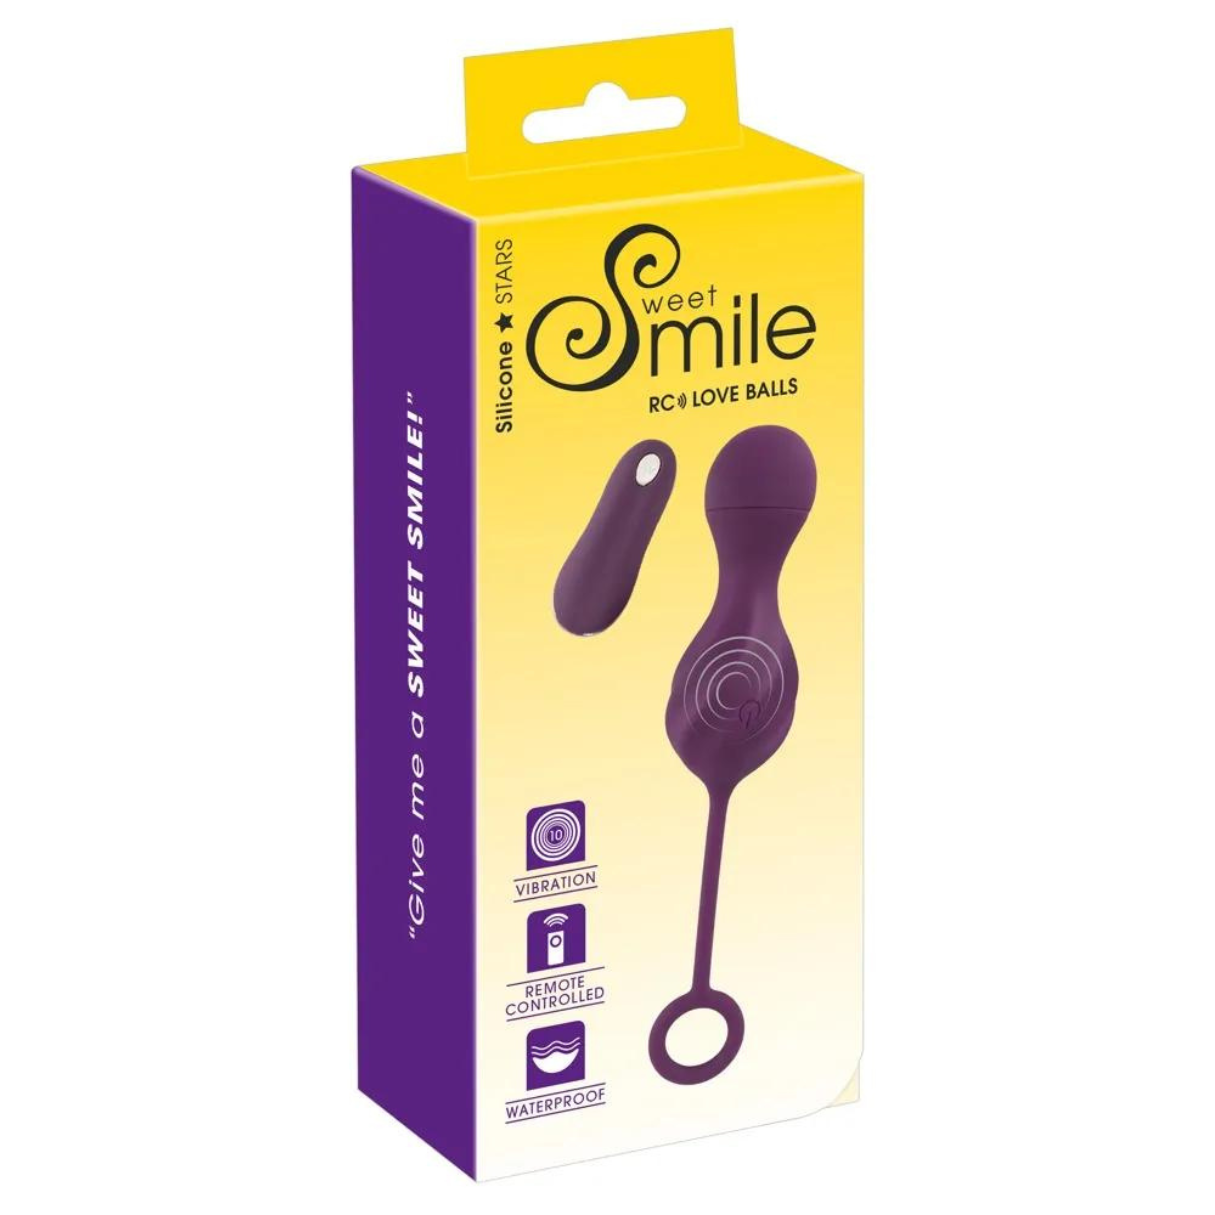 Love SMILE Controlled SWEET Remote Balls Vibrator